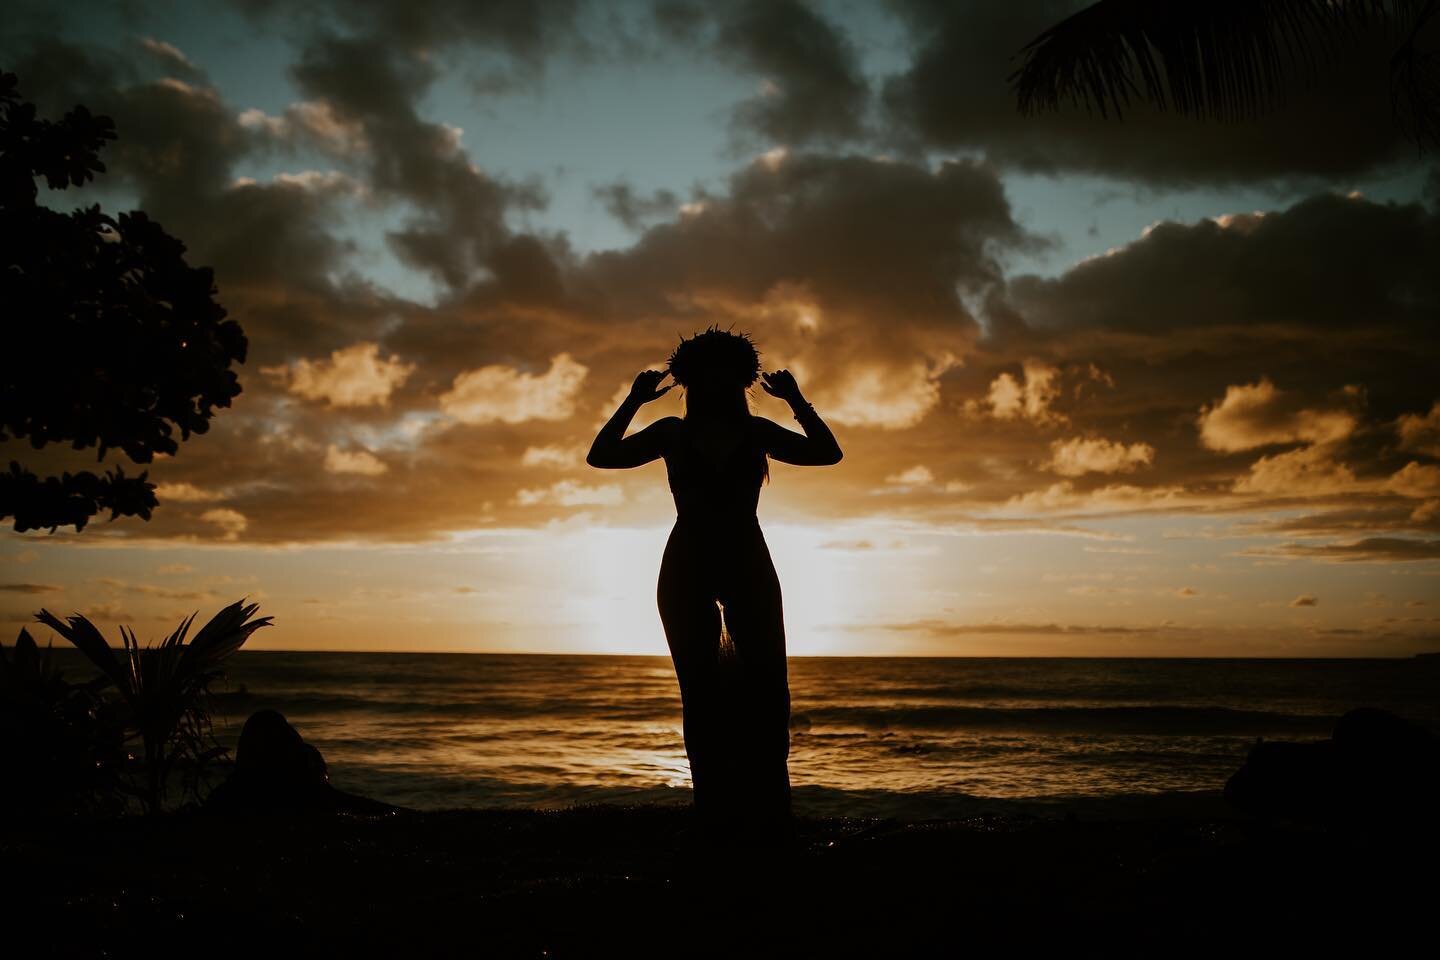 Sunrise silhouettes😍

Client tip! Think about your vision for your session. Different times of day will determine what you can expect from your images. 

Sometimes it takes sacrifice to get next level shots. I promise, waking up early is worth it! ?